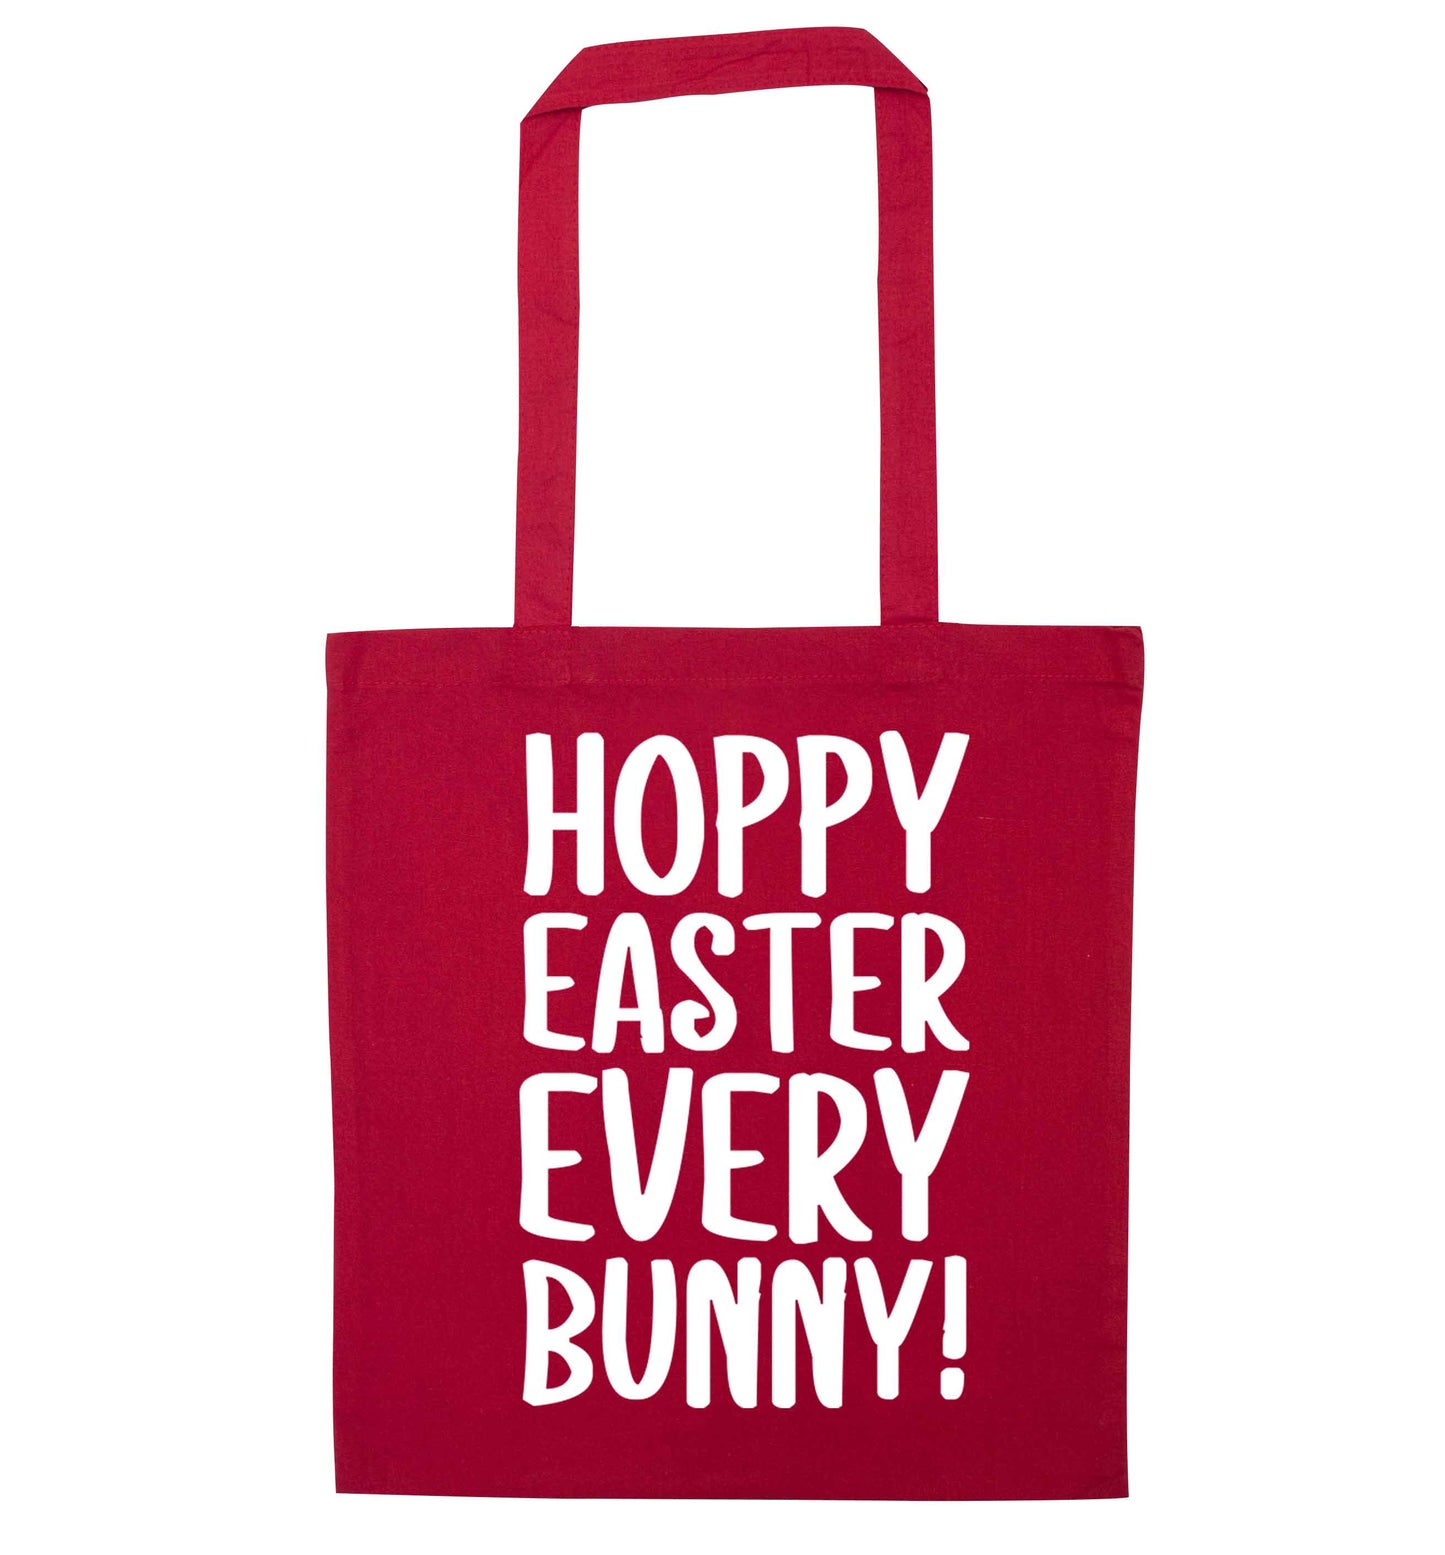 Hoppy Easter every bunny! red tote bag